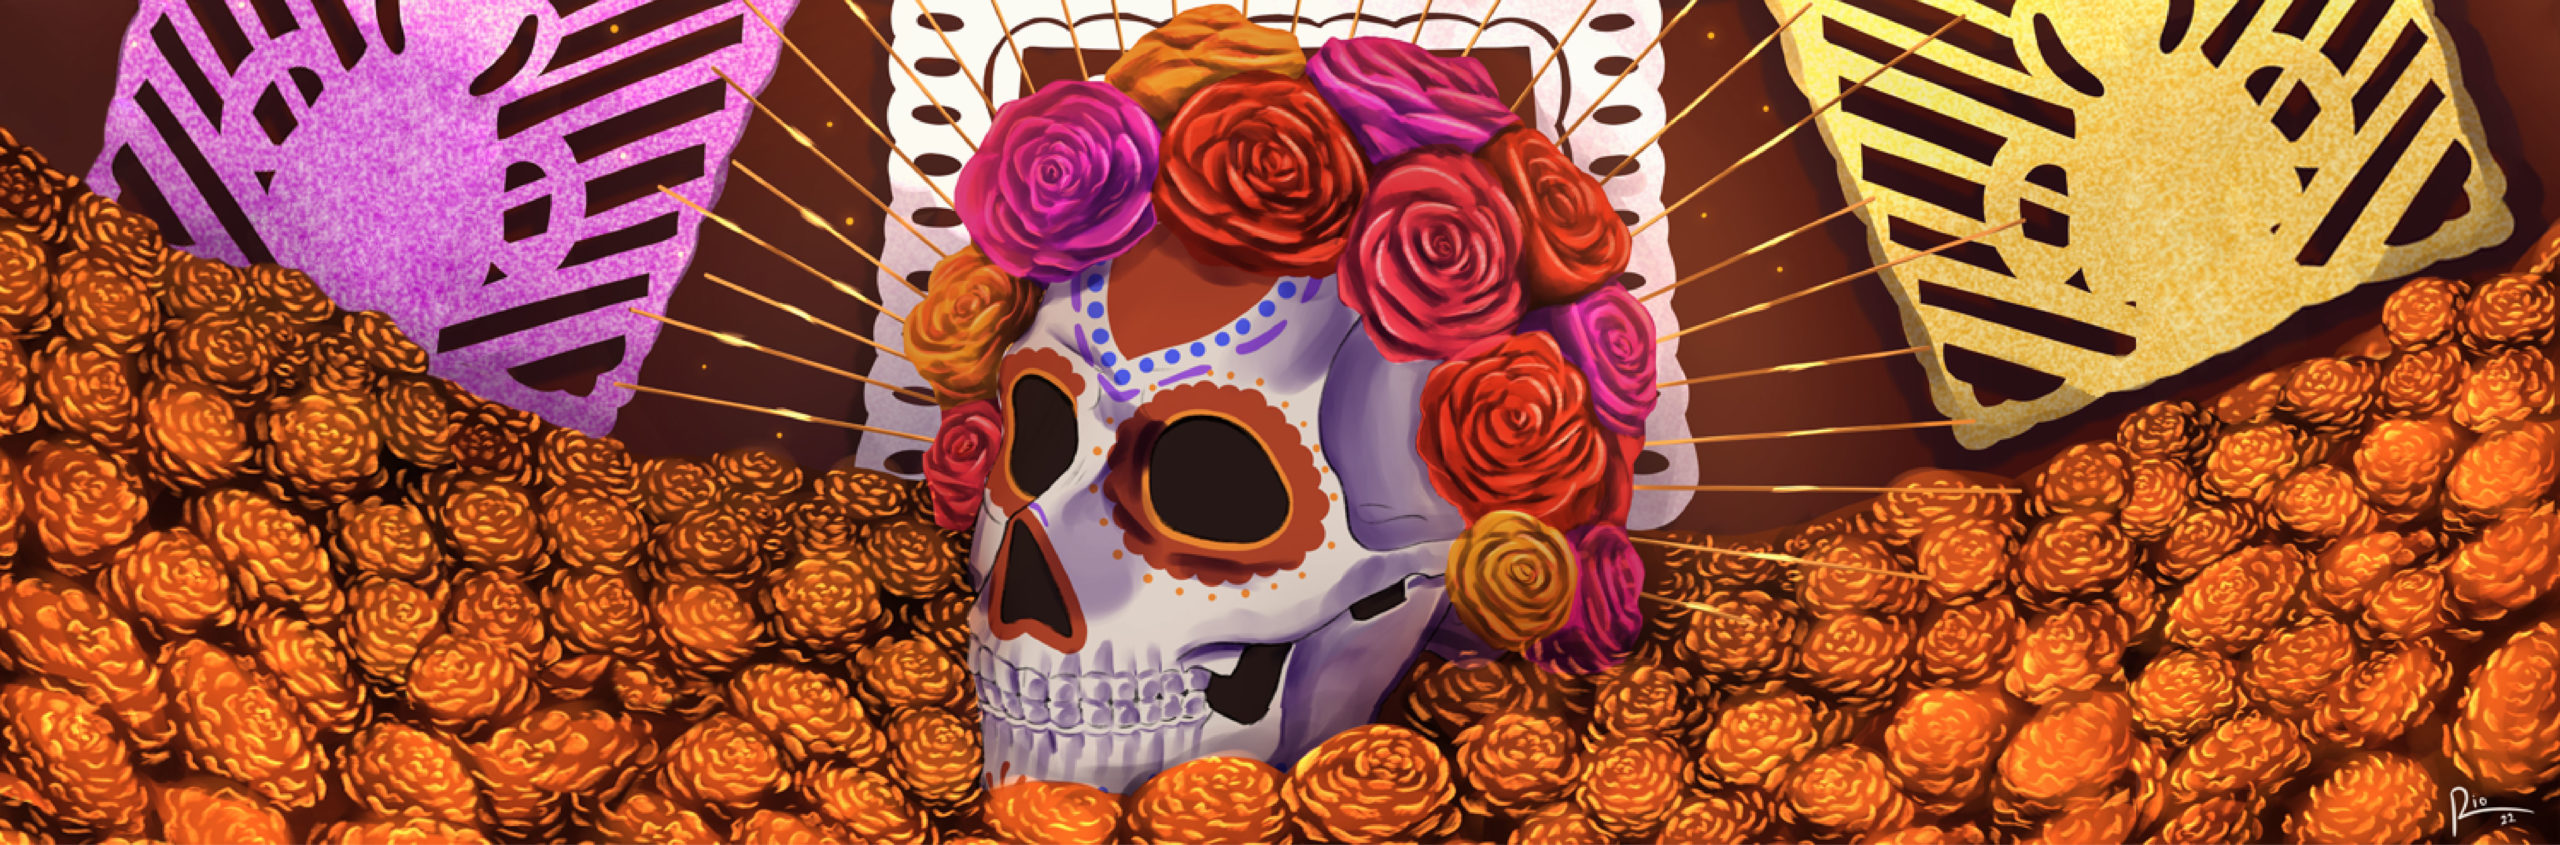 Illustration of skull adorned with bright red and orange flowers sits in front of a colorful banner